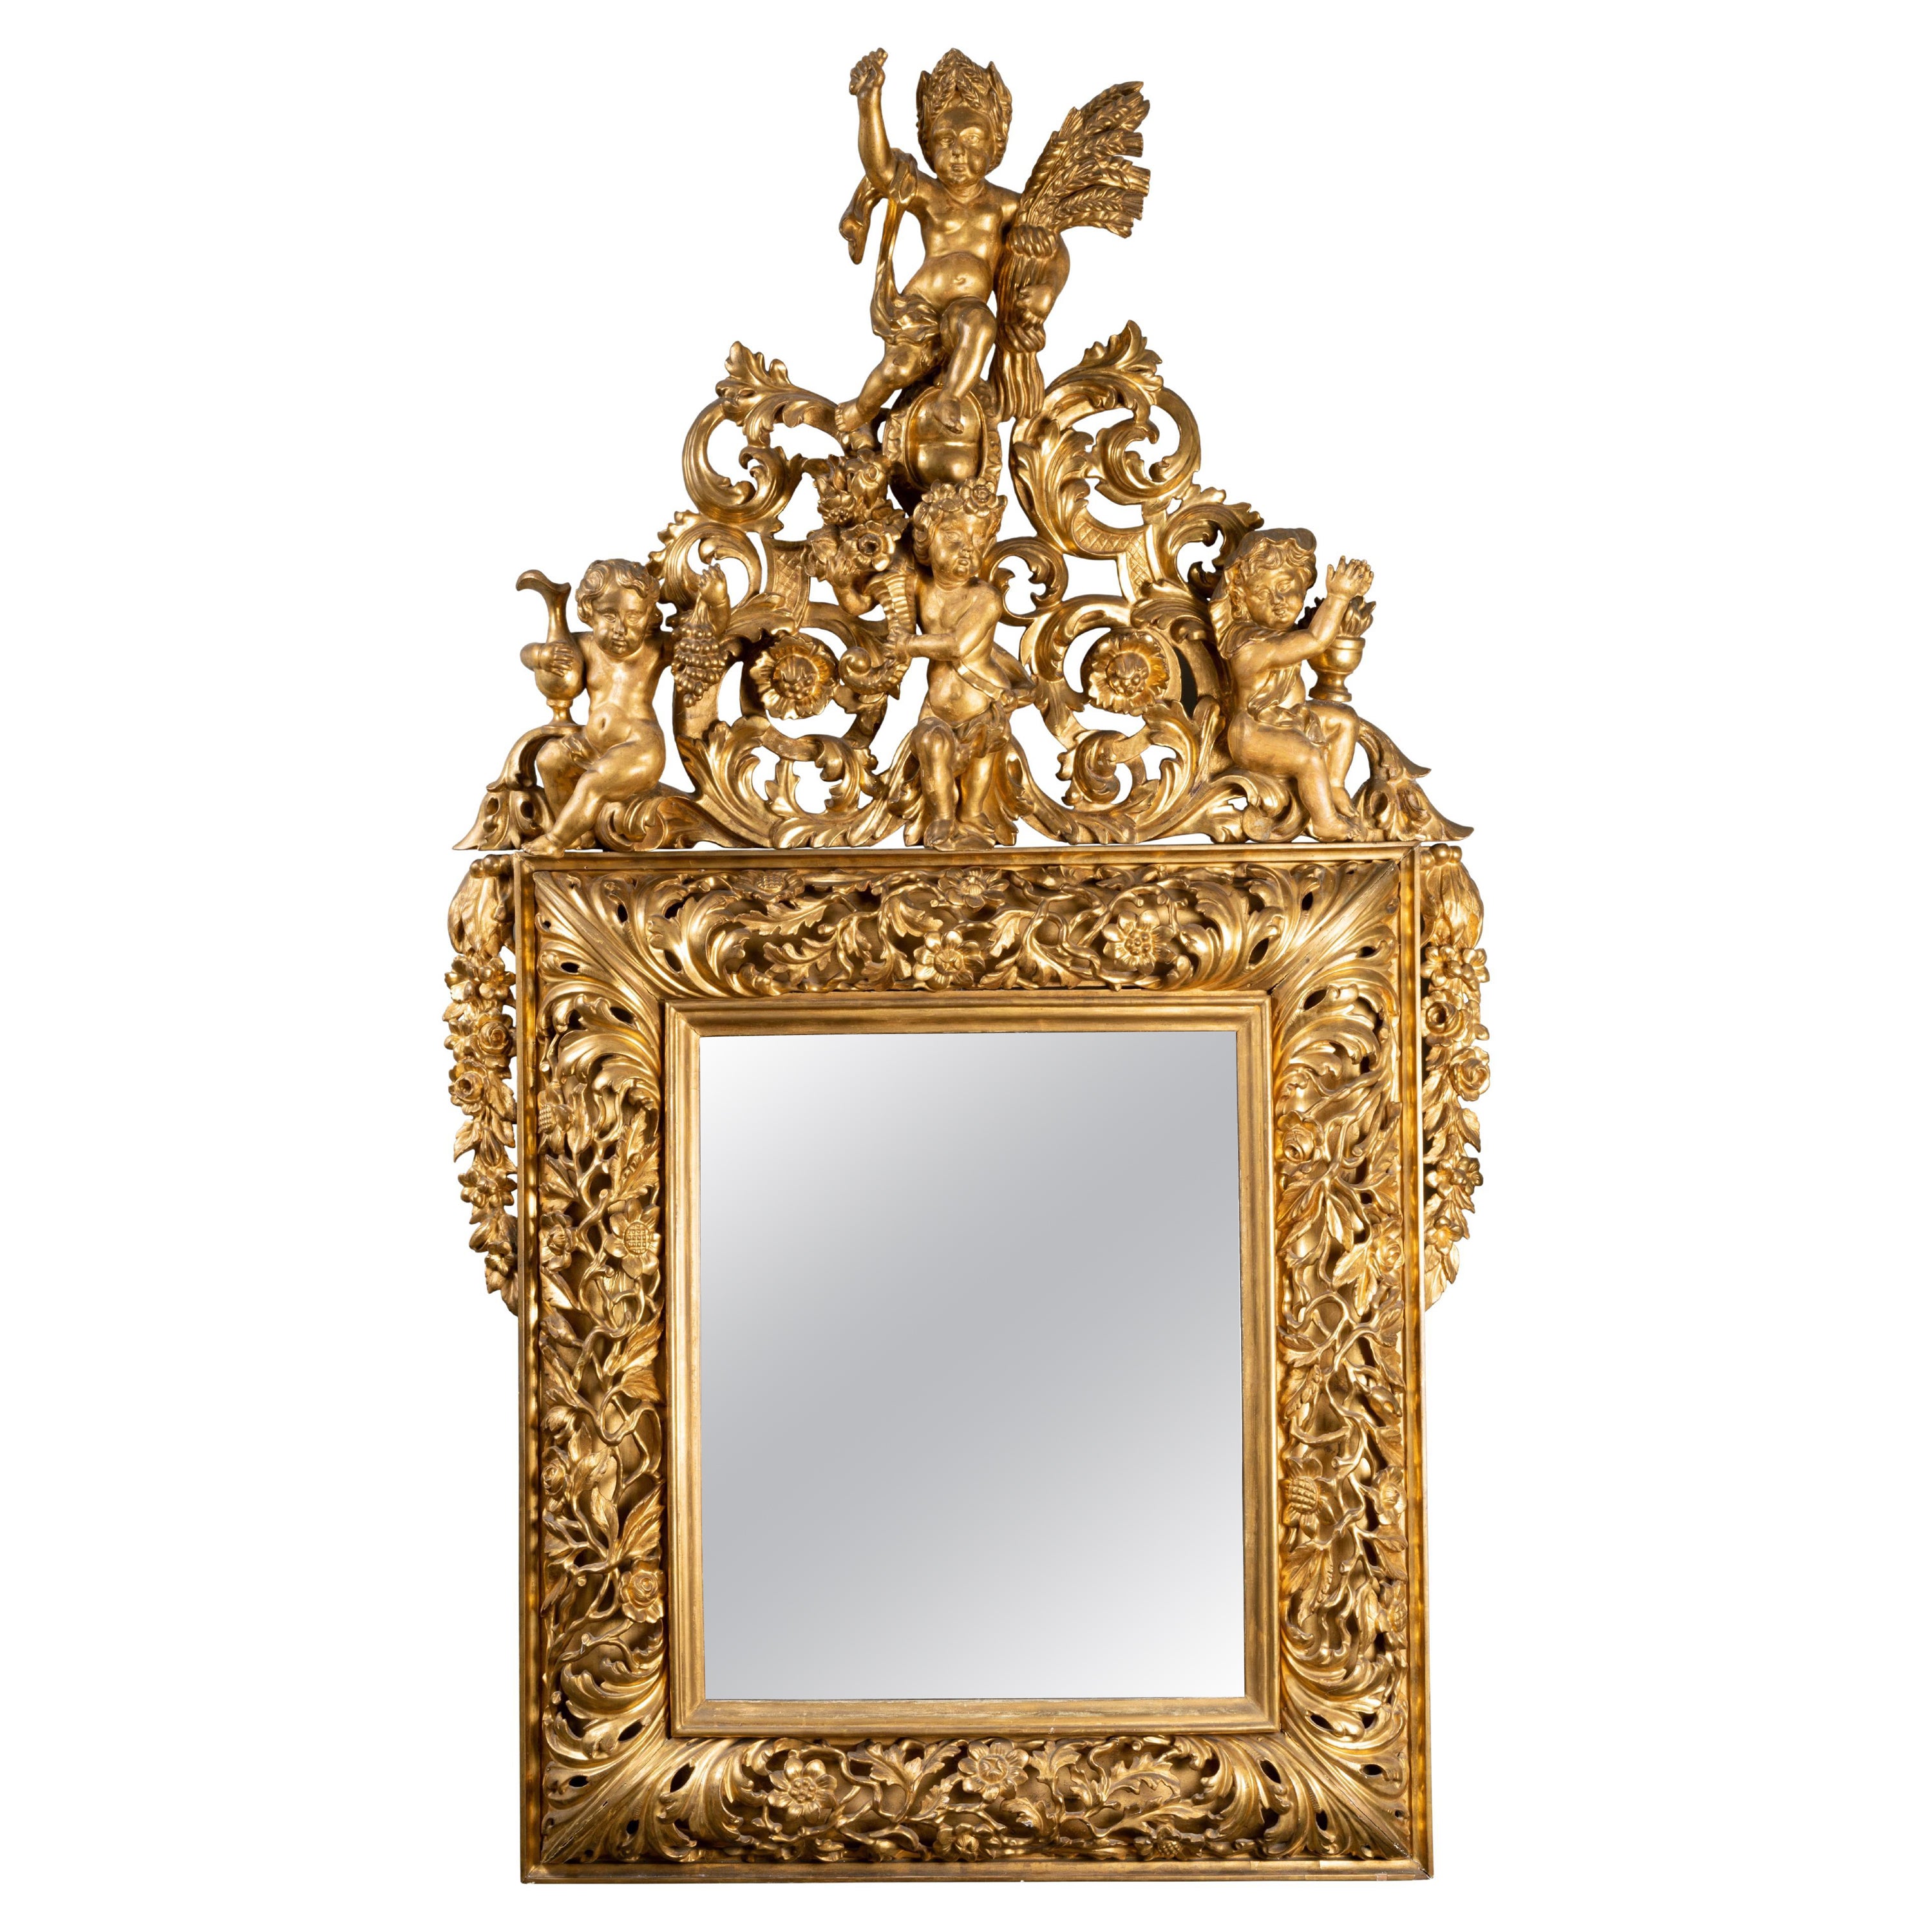 Early 18th Century Italian Carved Giltwood Mirror Depicting Four Seasons